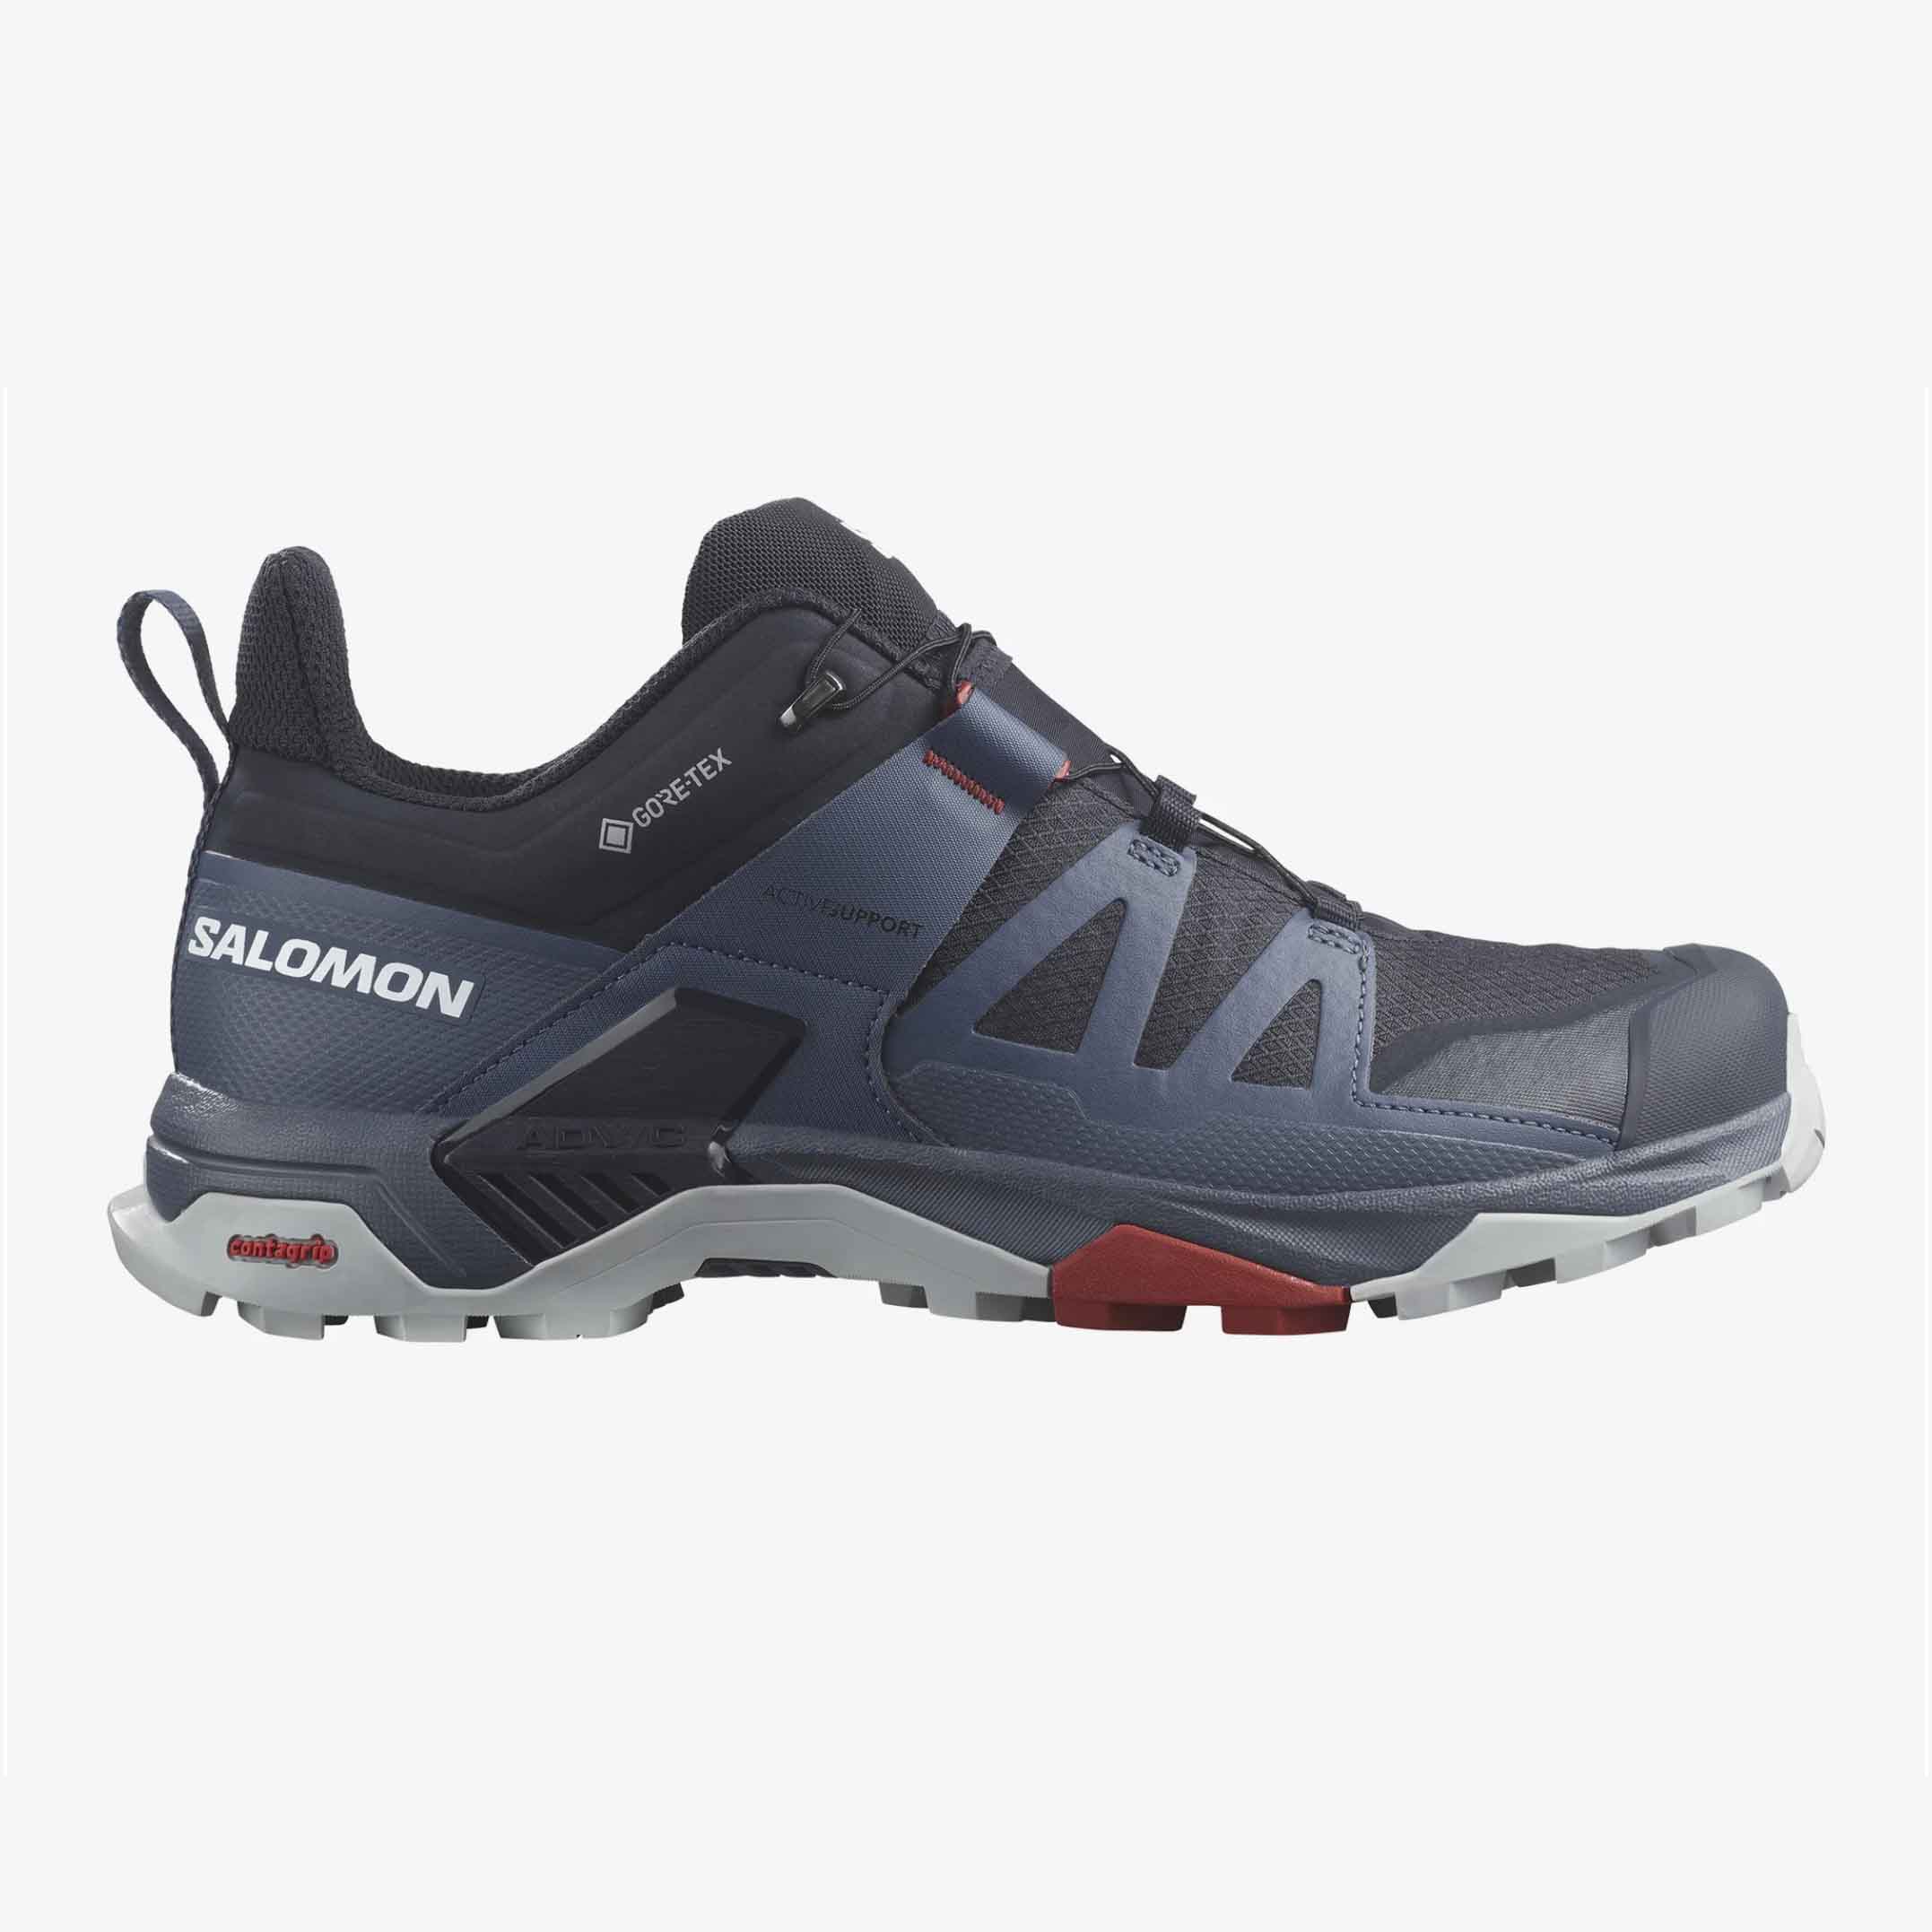 X Ultra 4 Gore-Tex Hiking Shoes for men in blue and black